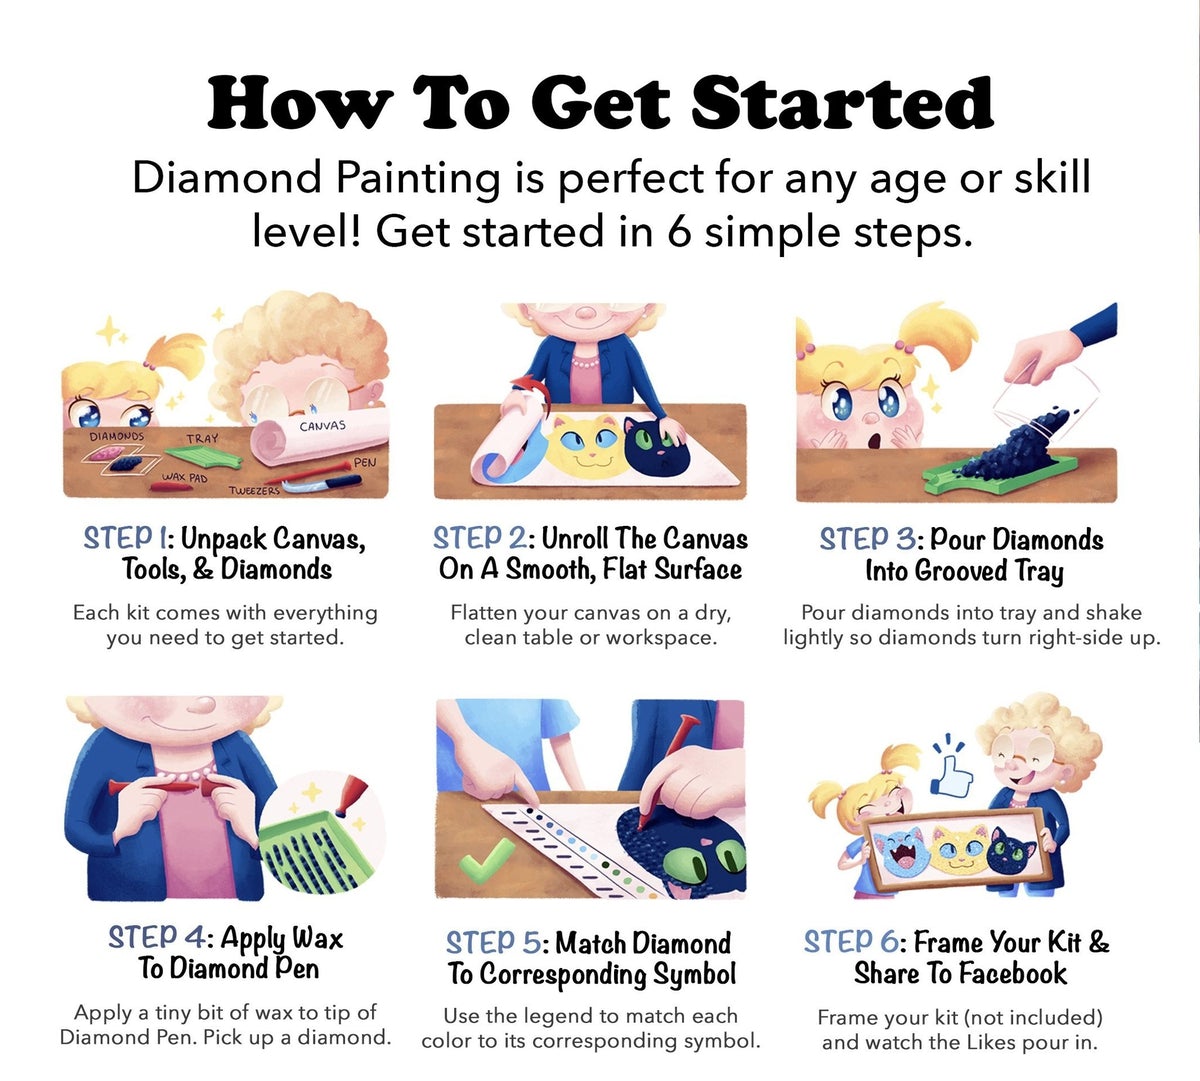 When Dreams Come True Diamond Painting Kit (Full Drill) – Paint With  Diamonds